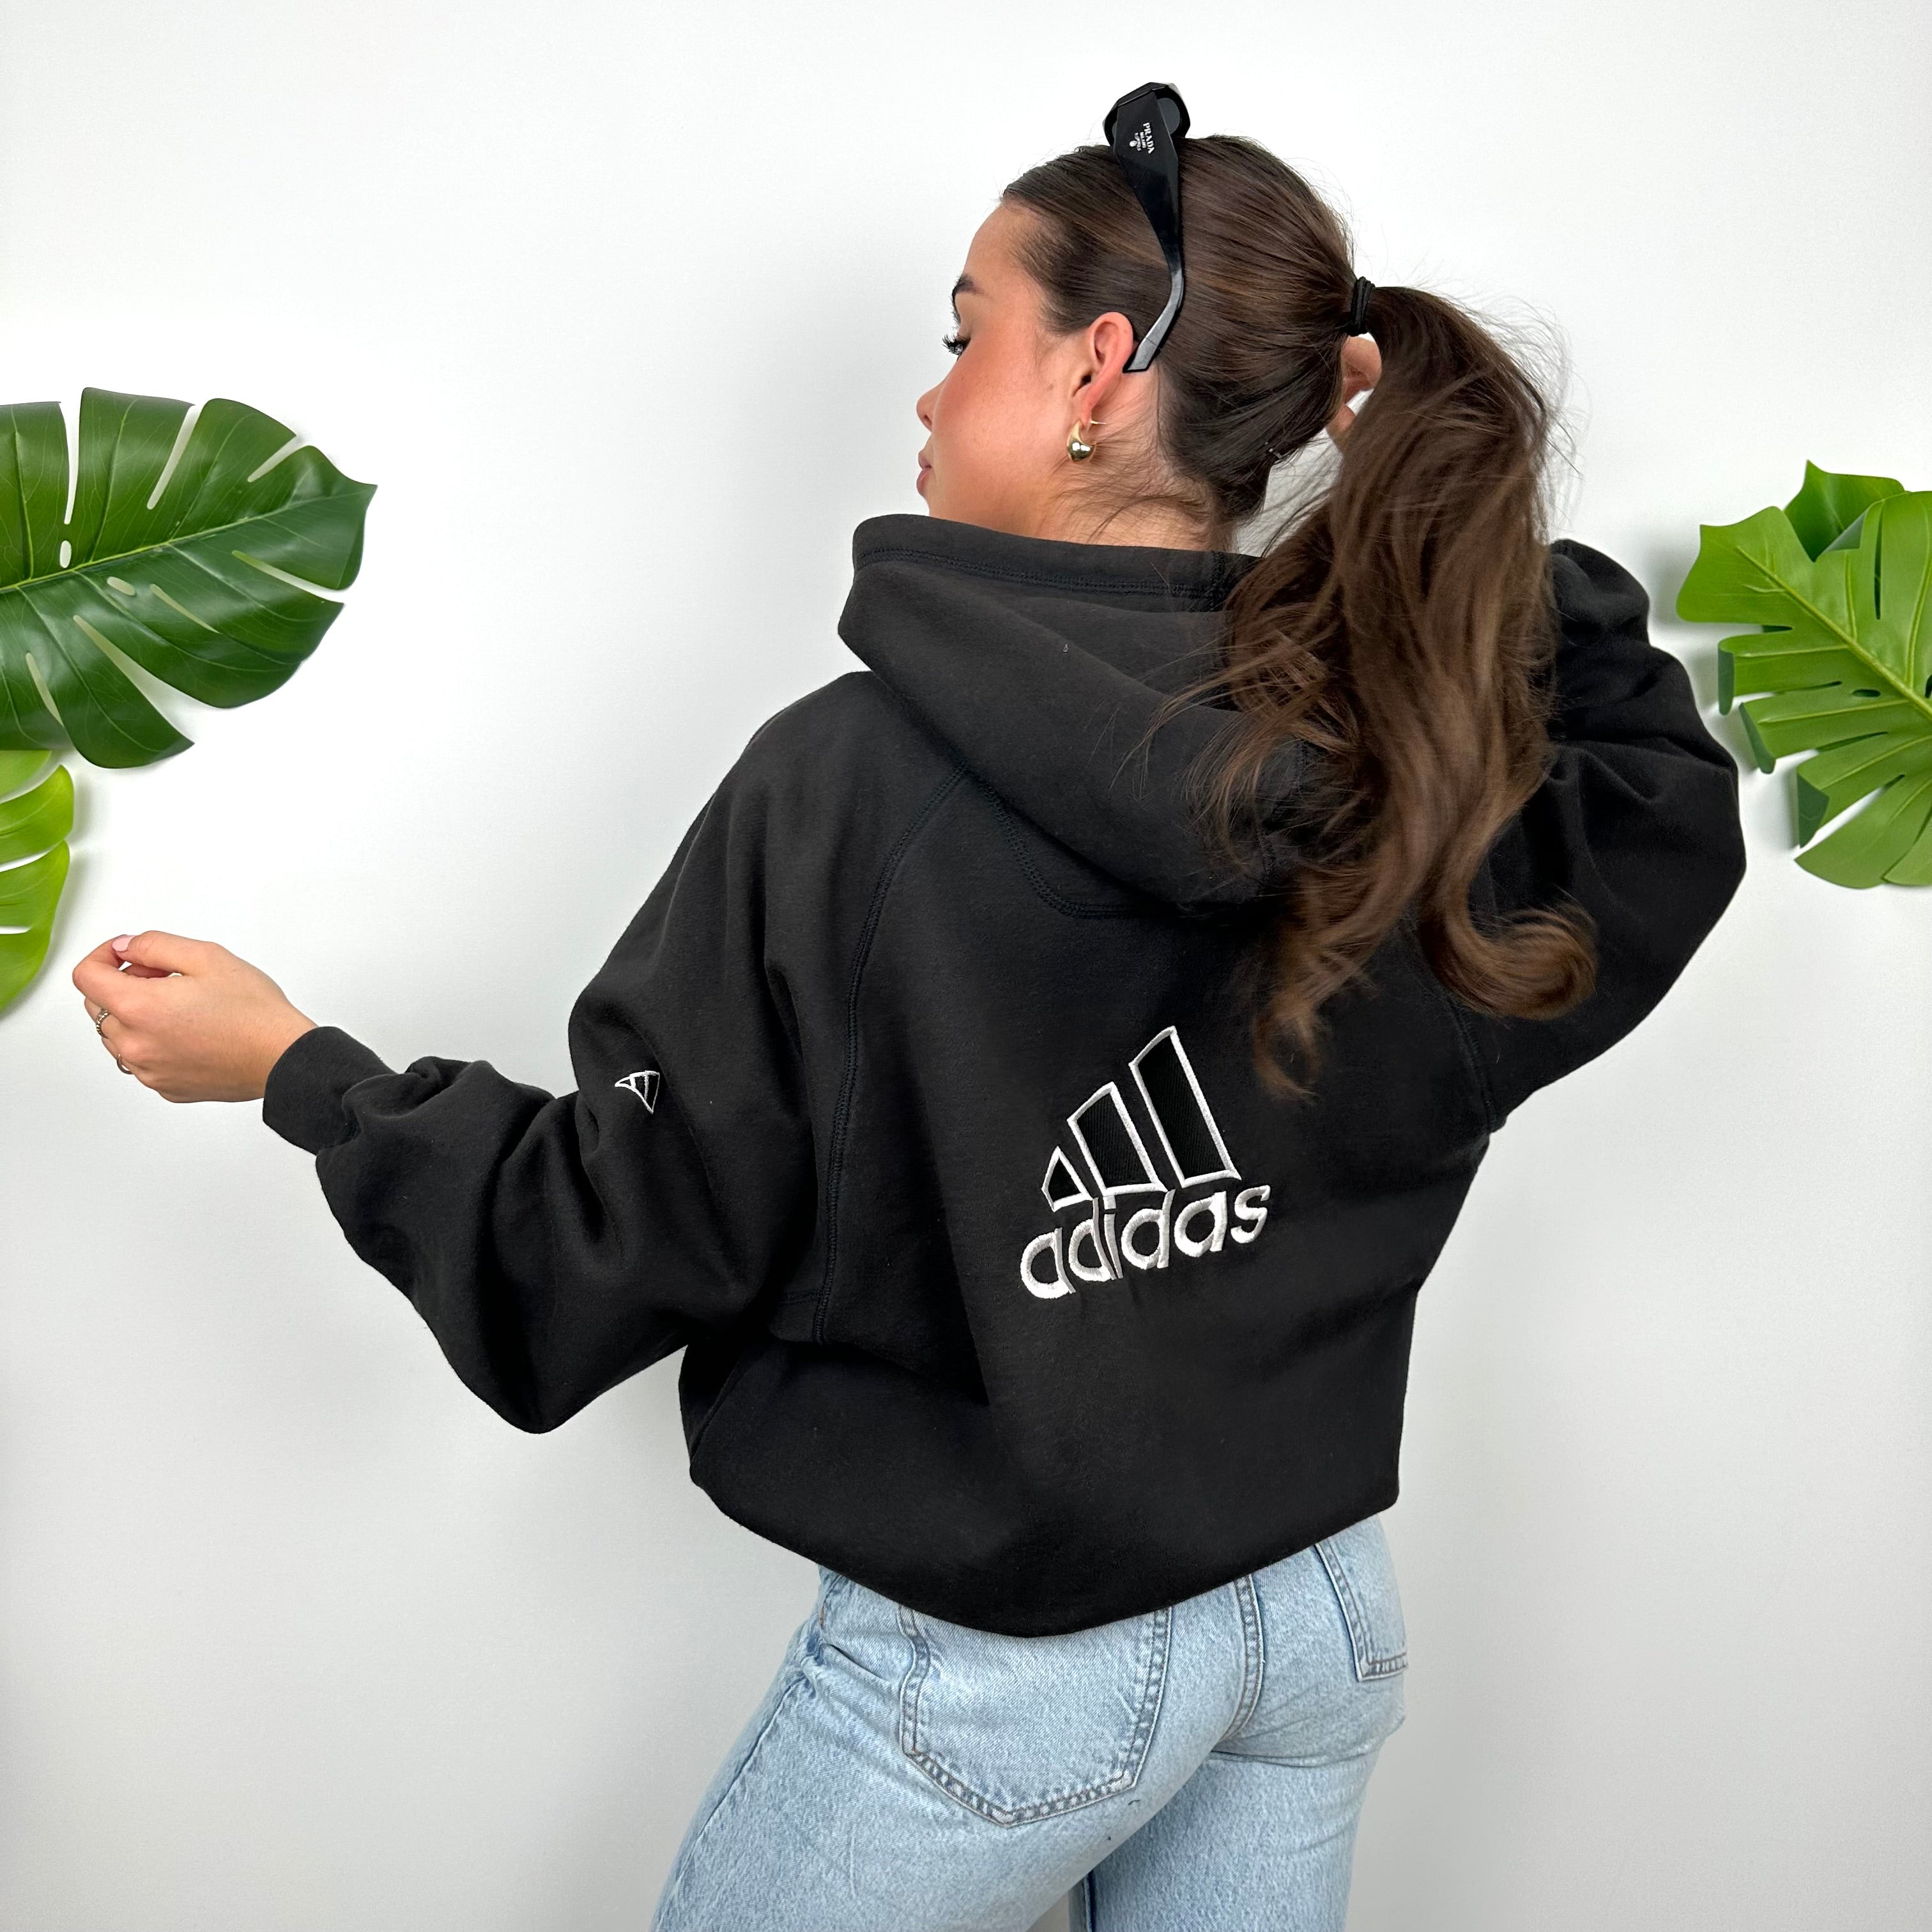 Adidas Black Embroidered Spell Out Zip Up Hoodie Jacket (M)